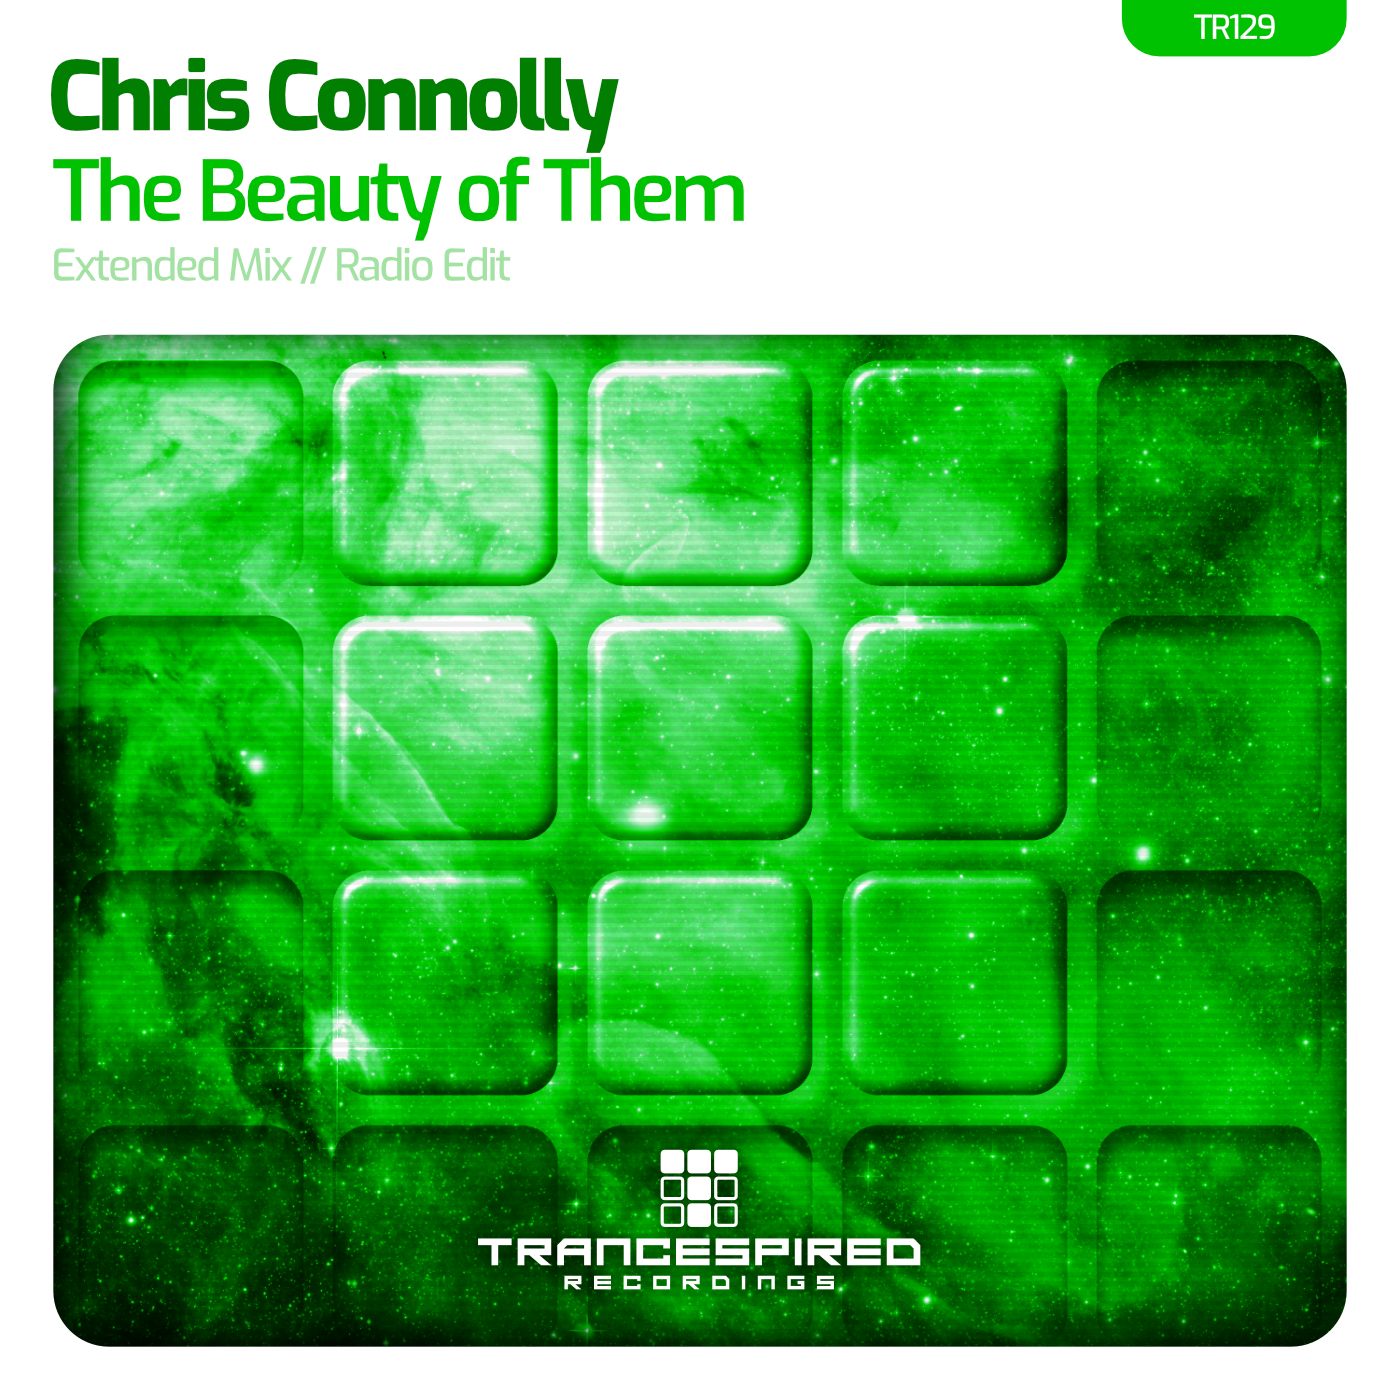 Chris Connolly presents The Beauty Of Them on Trancespired Recordings